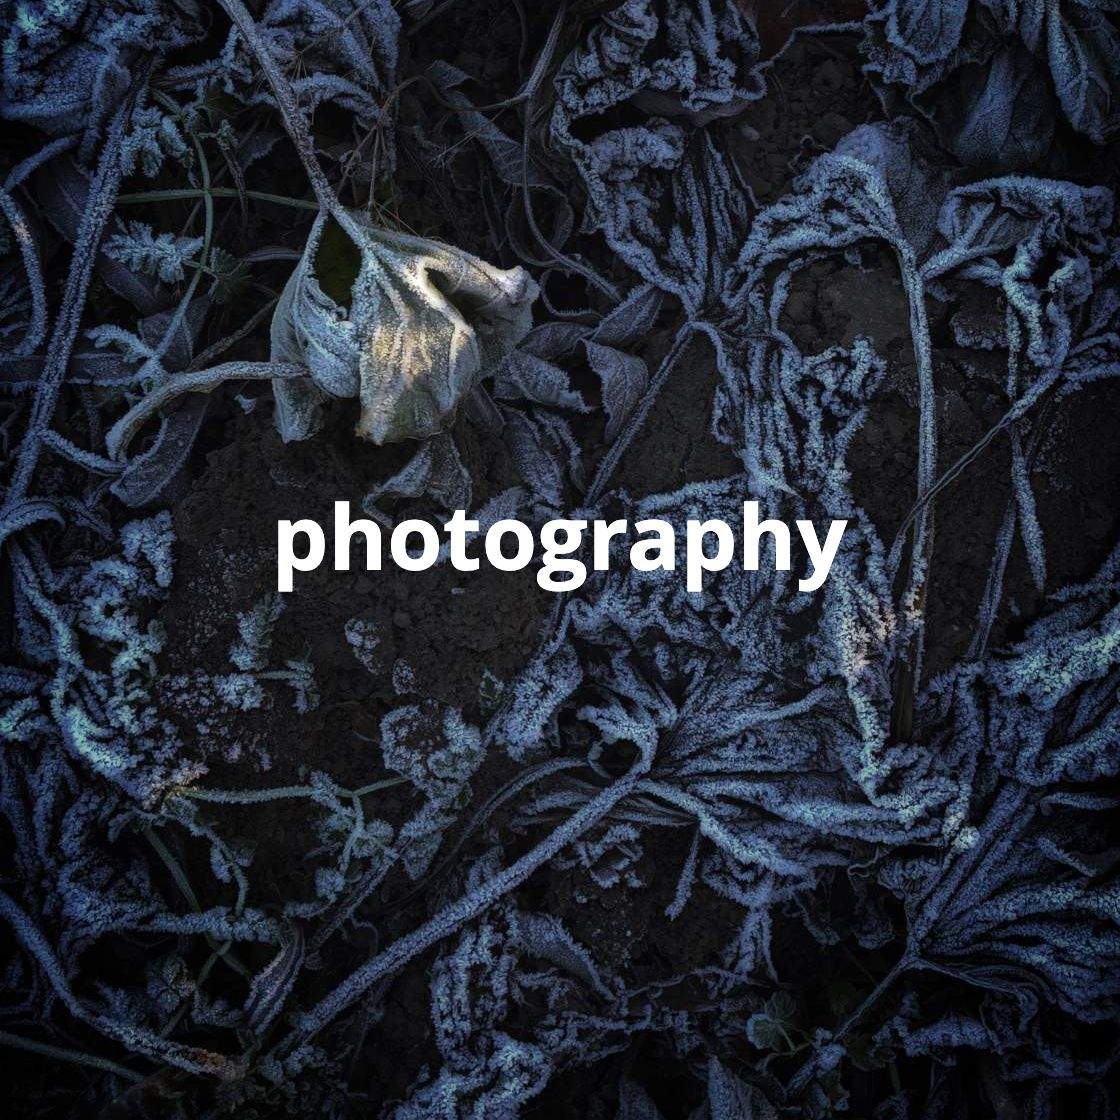 fine art photo with text 'photography' that links to pages with nicole gadiel's fine art photography, paintings and interior decor artwork